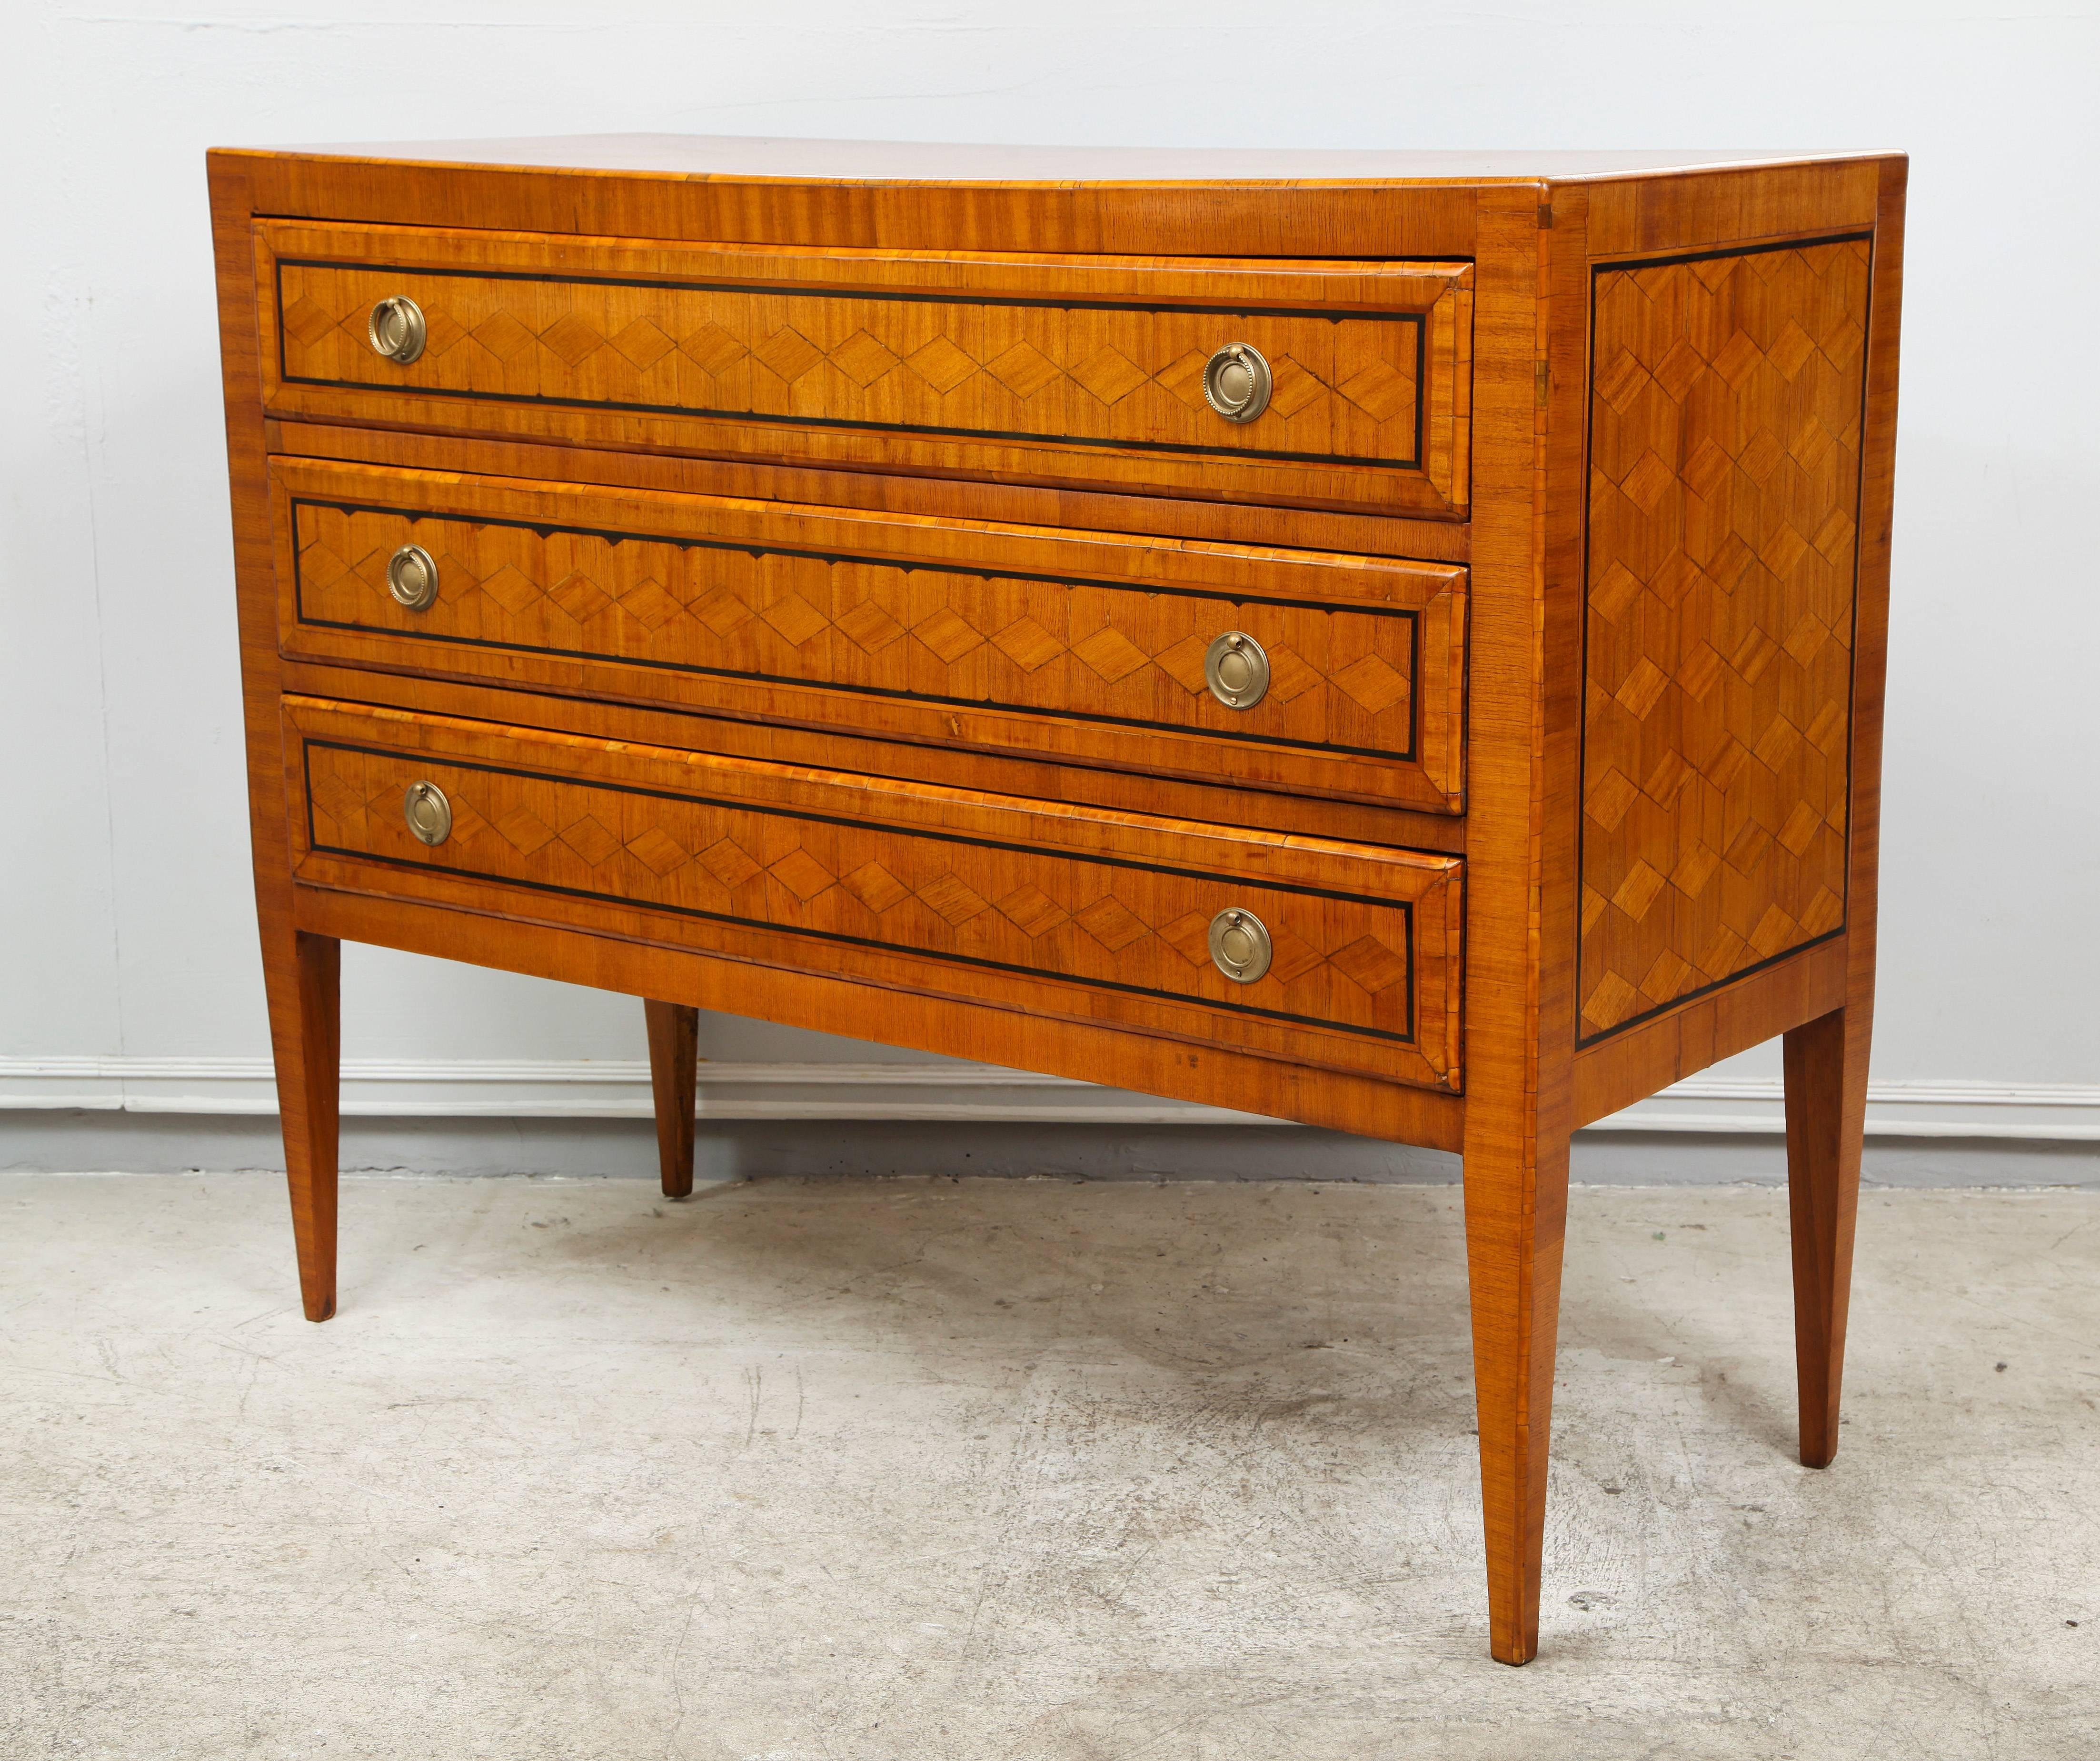 Exquisite Italian parquetry commode in the neoclassical manner with three pull-out drawers on tapered legs.